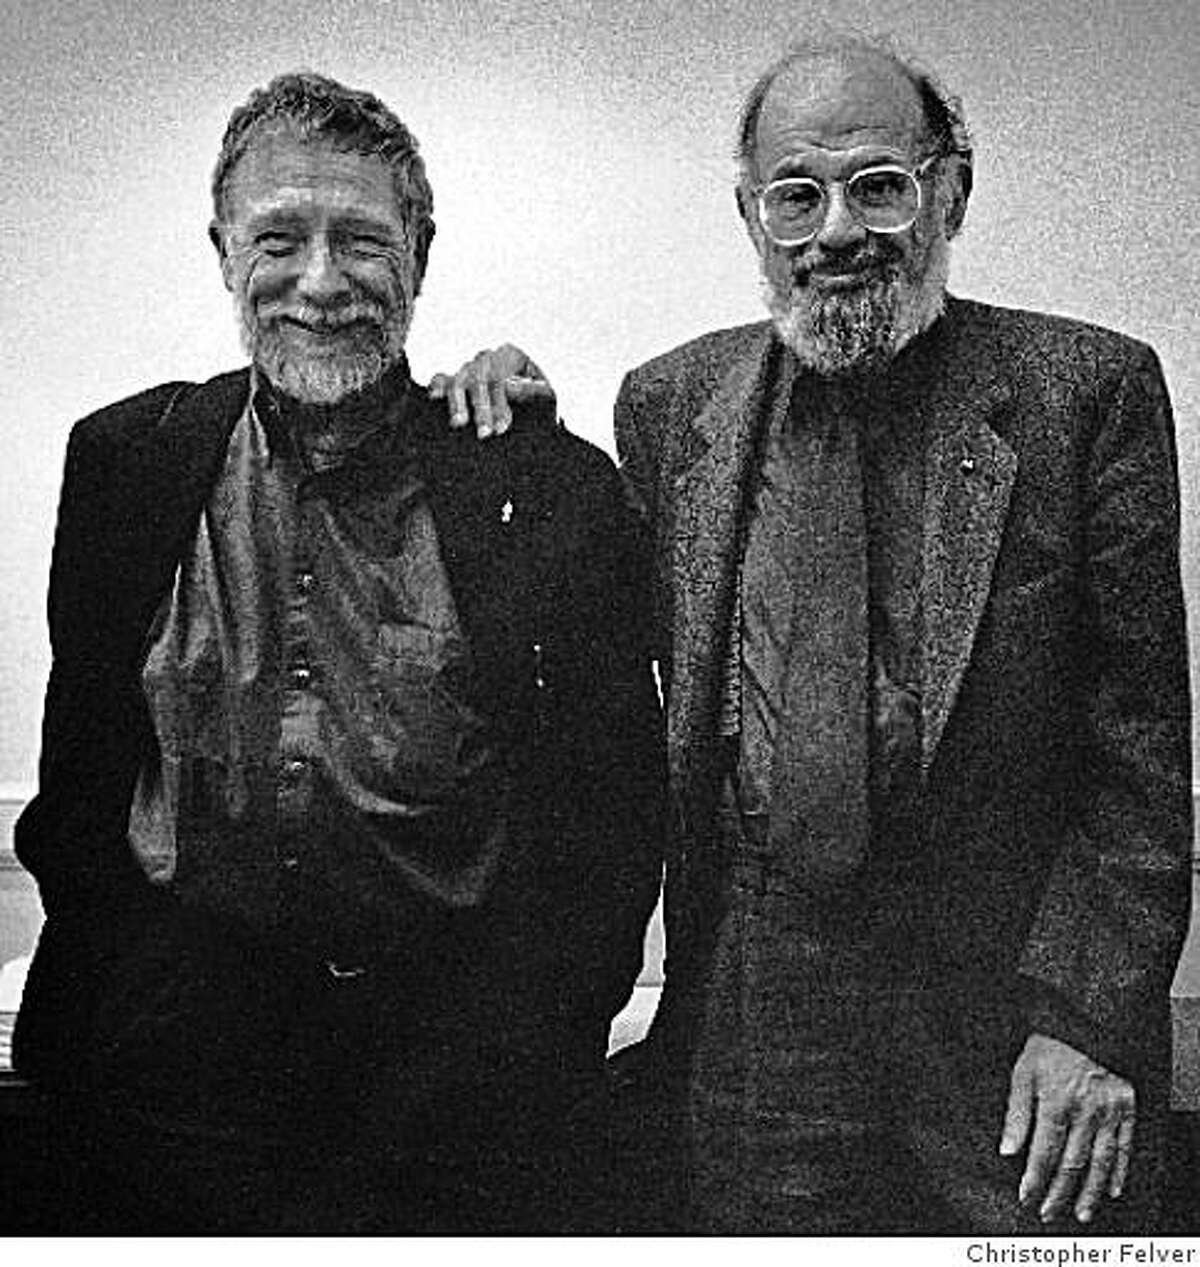 Gary Snyder and Allen Ginsberg met in San Francisco in 1955 and corresponded until 1995, two years before Ginsberg died.